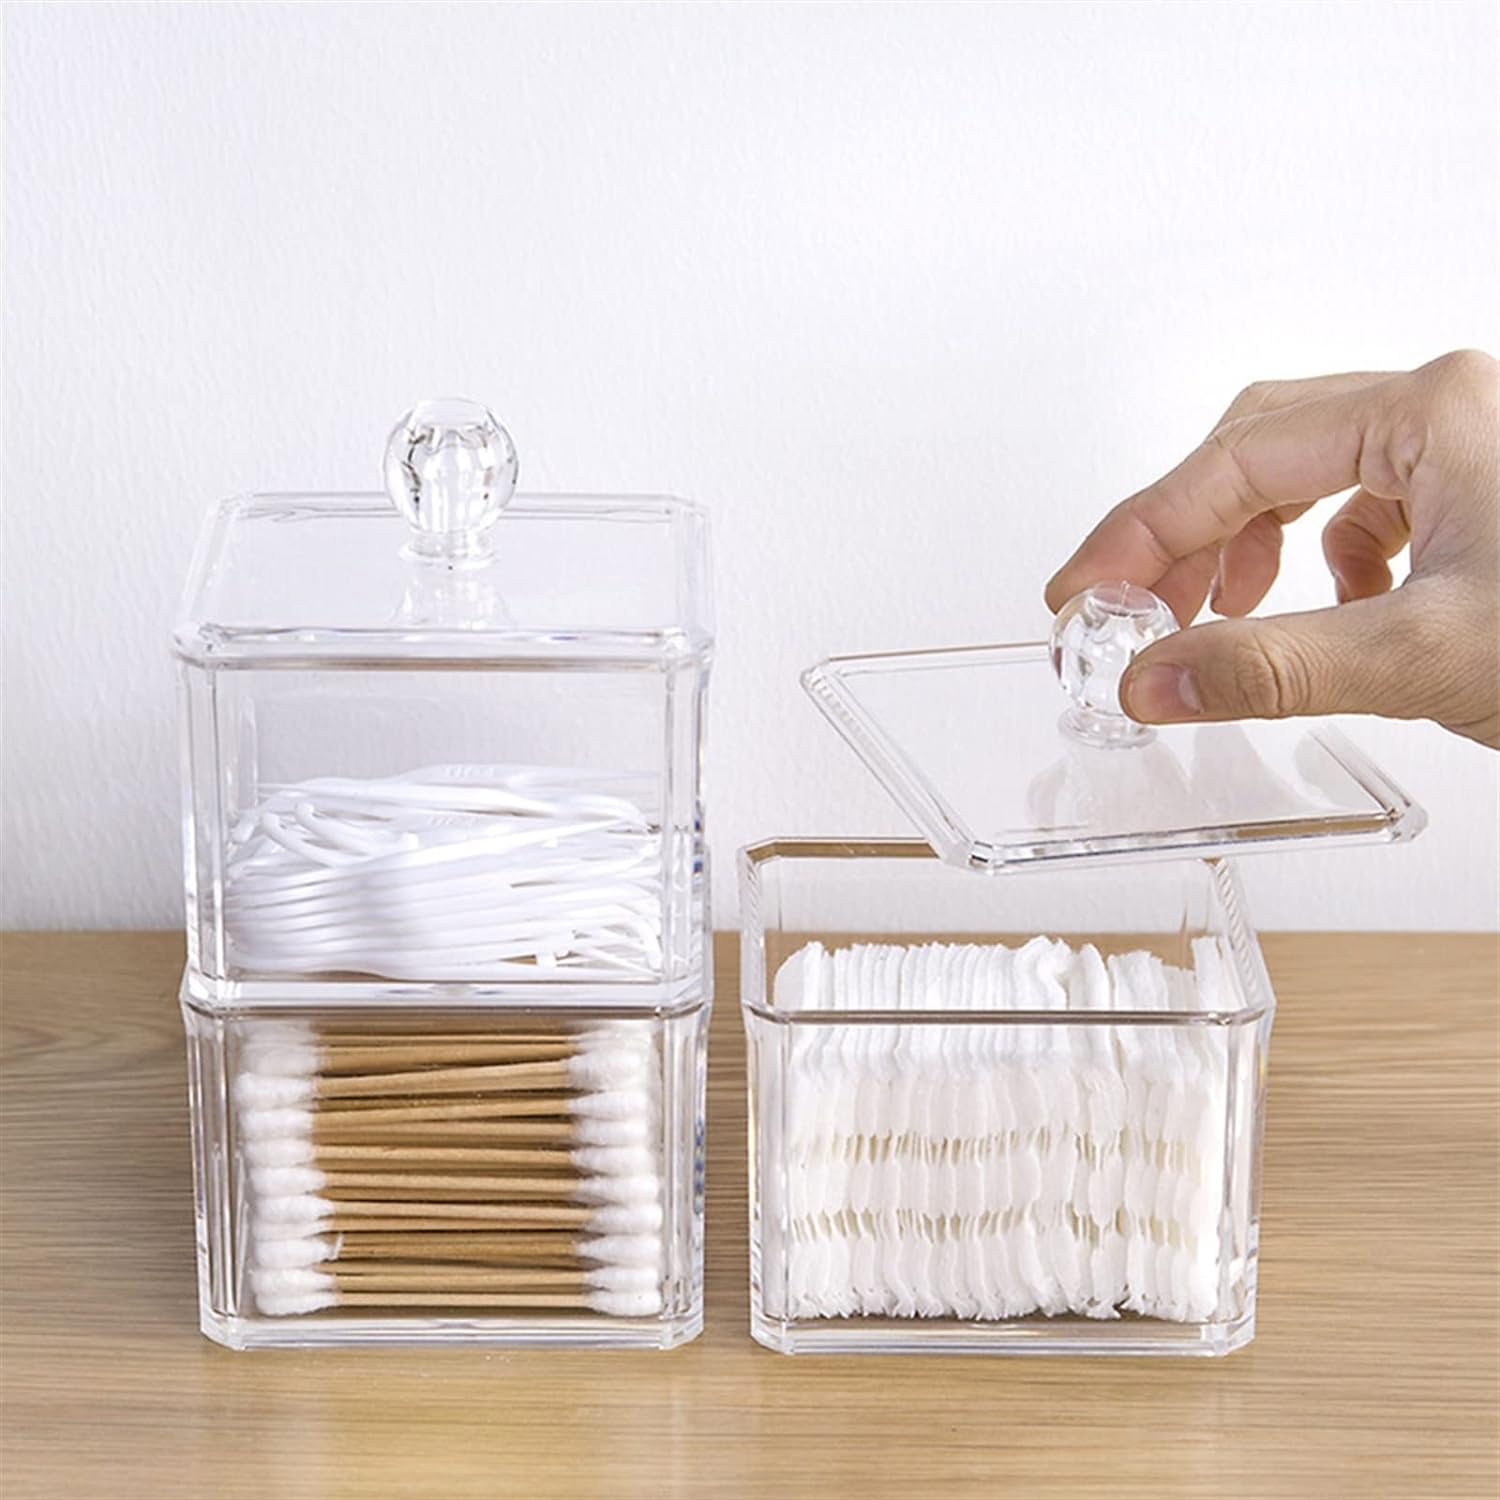 Clear acrylic storage box for multiple uses and organization of collectibles